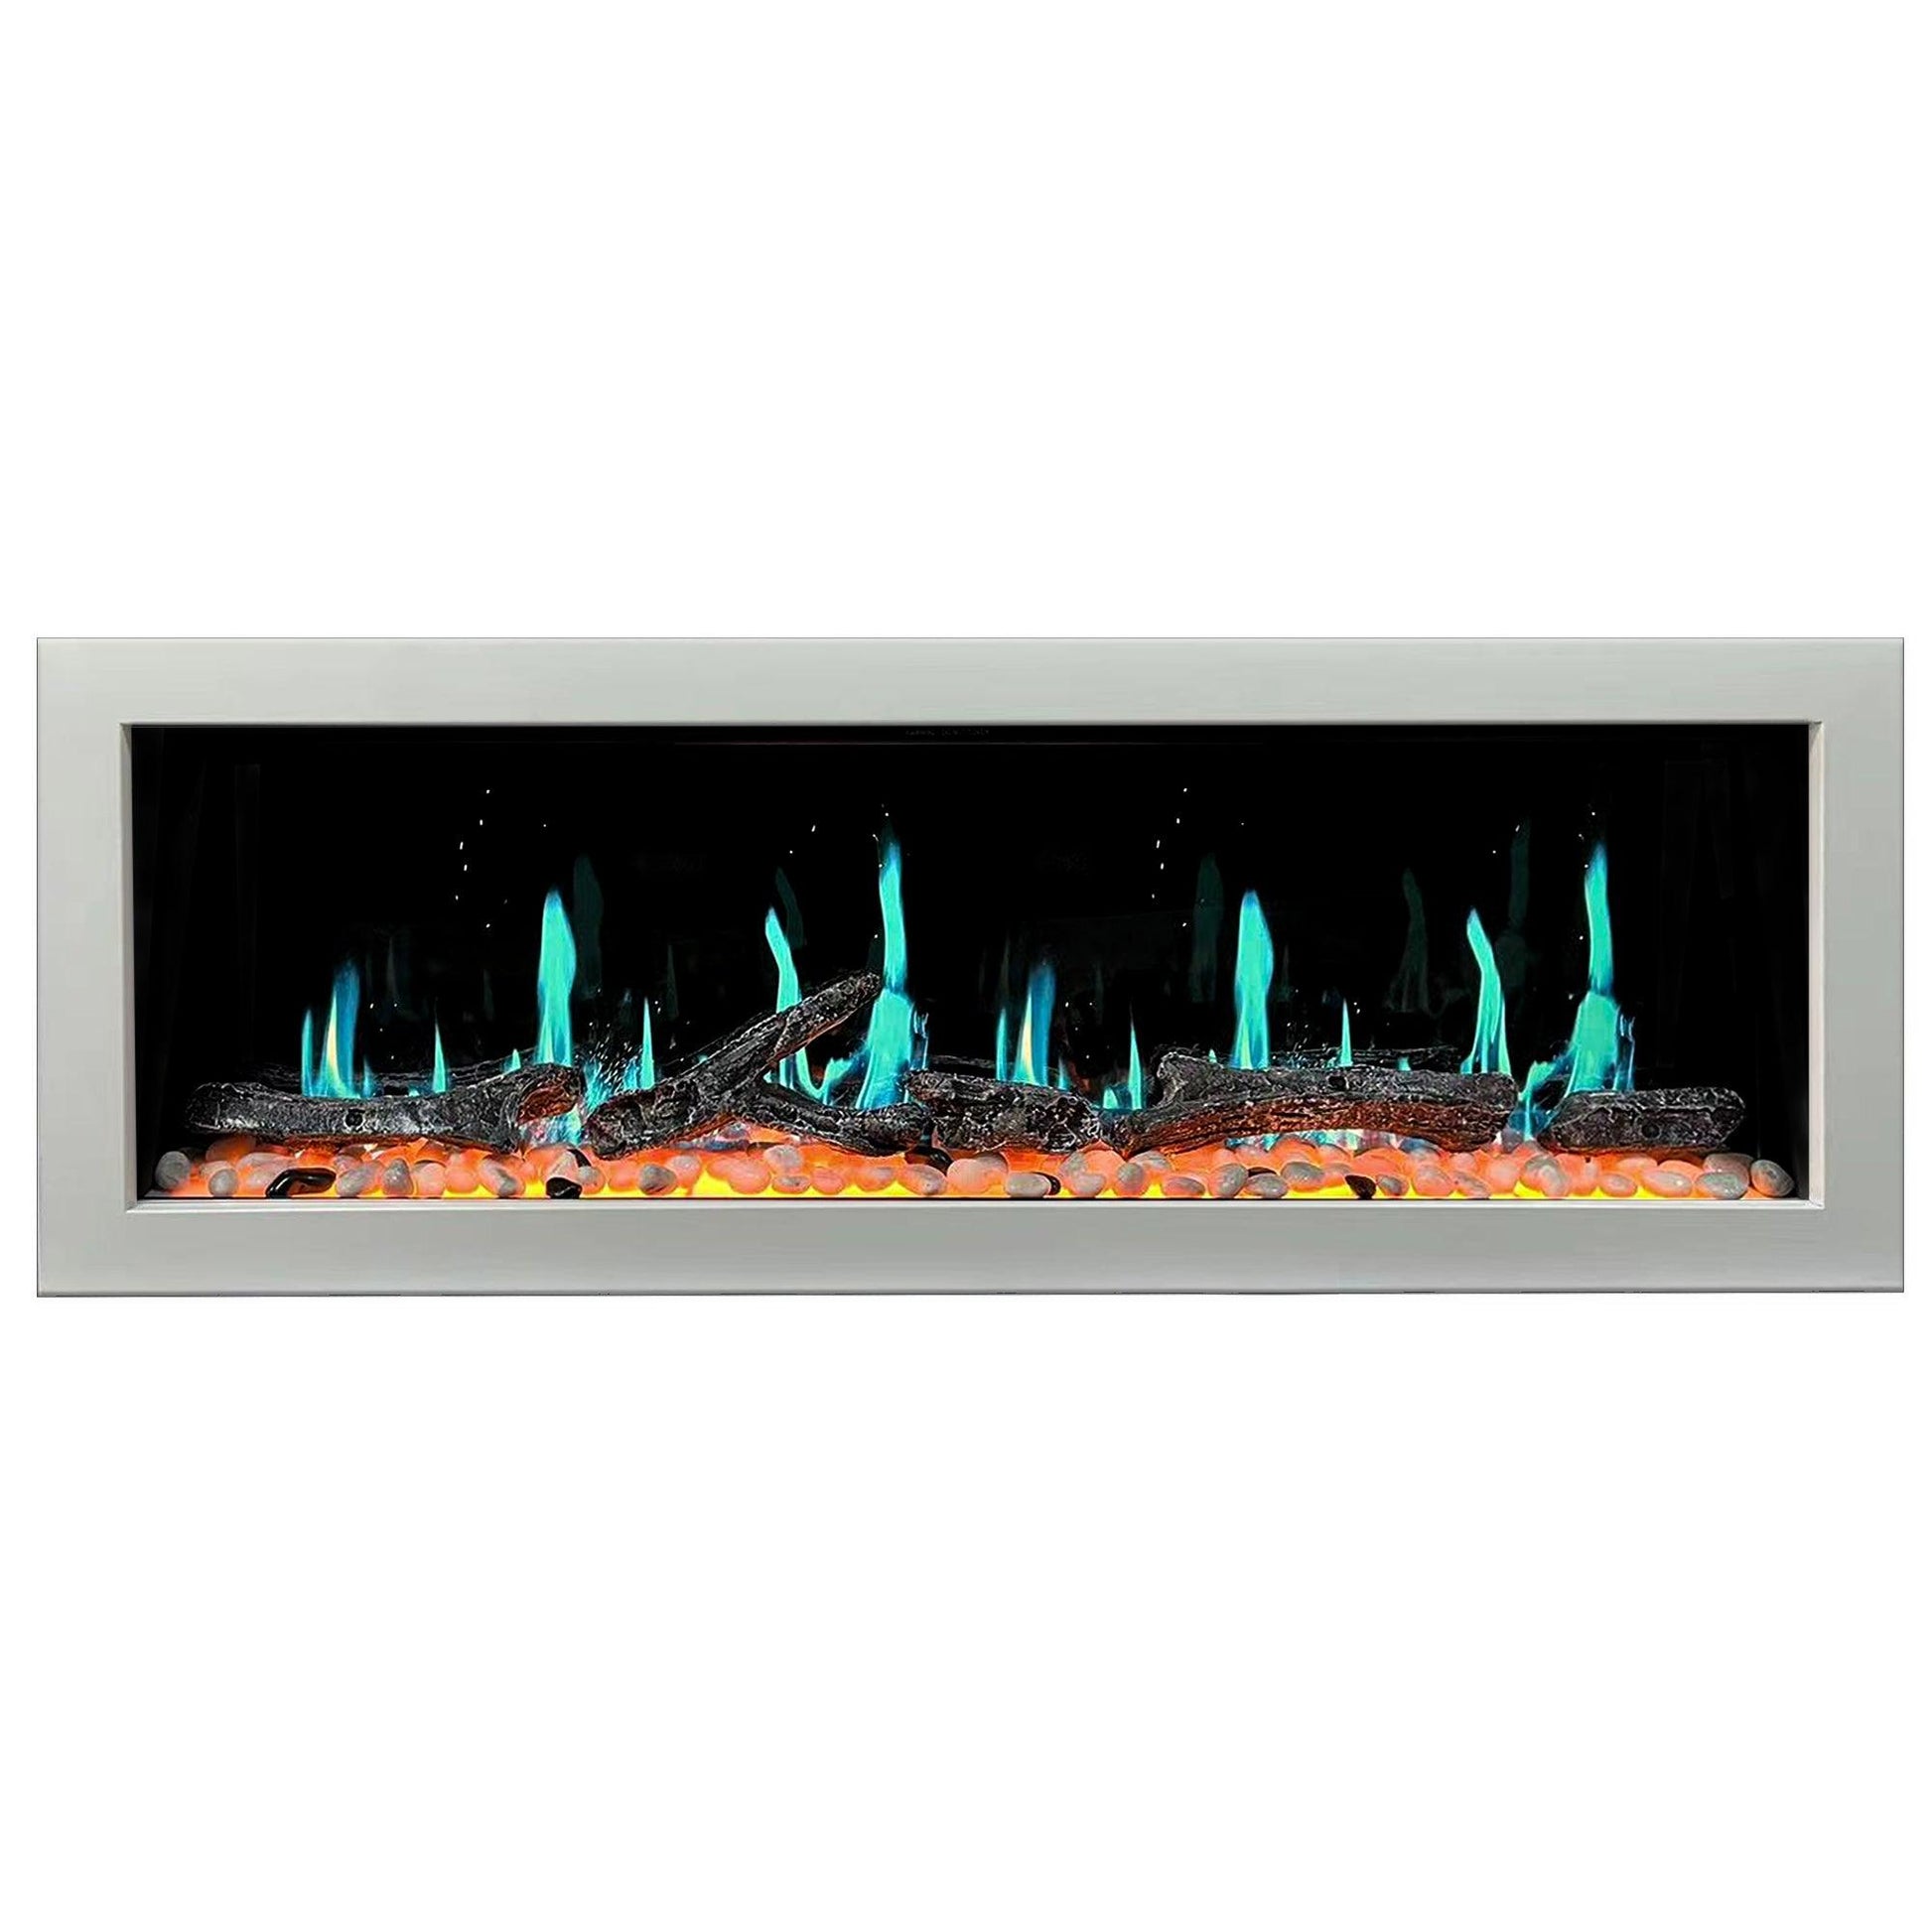 ZopaFlame™ 58" Linear Wall-mount Electric Fireplace - WP19588V - ZopaFlame Fireplaces